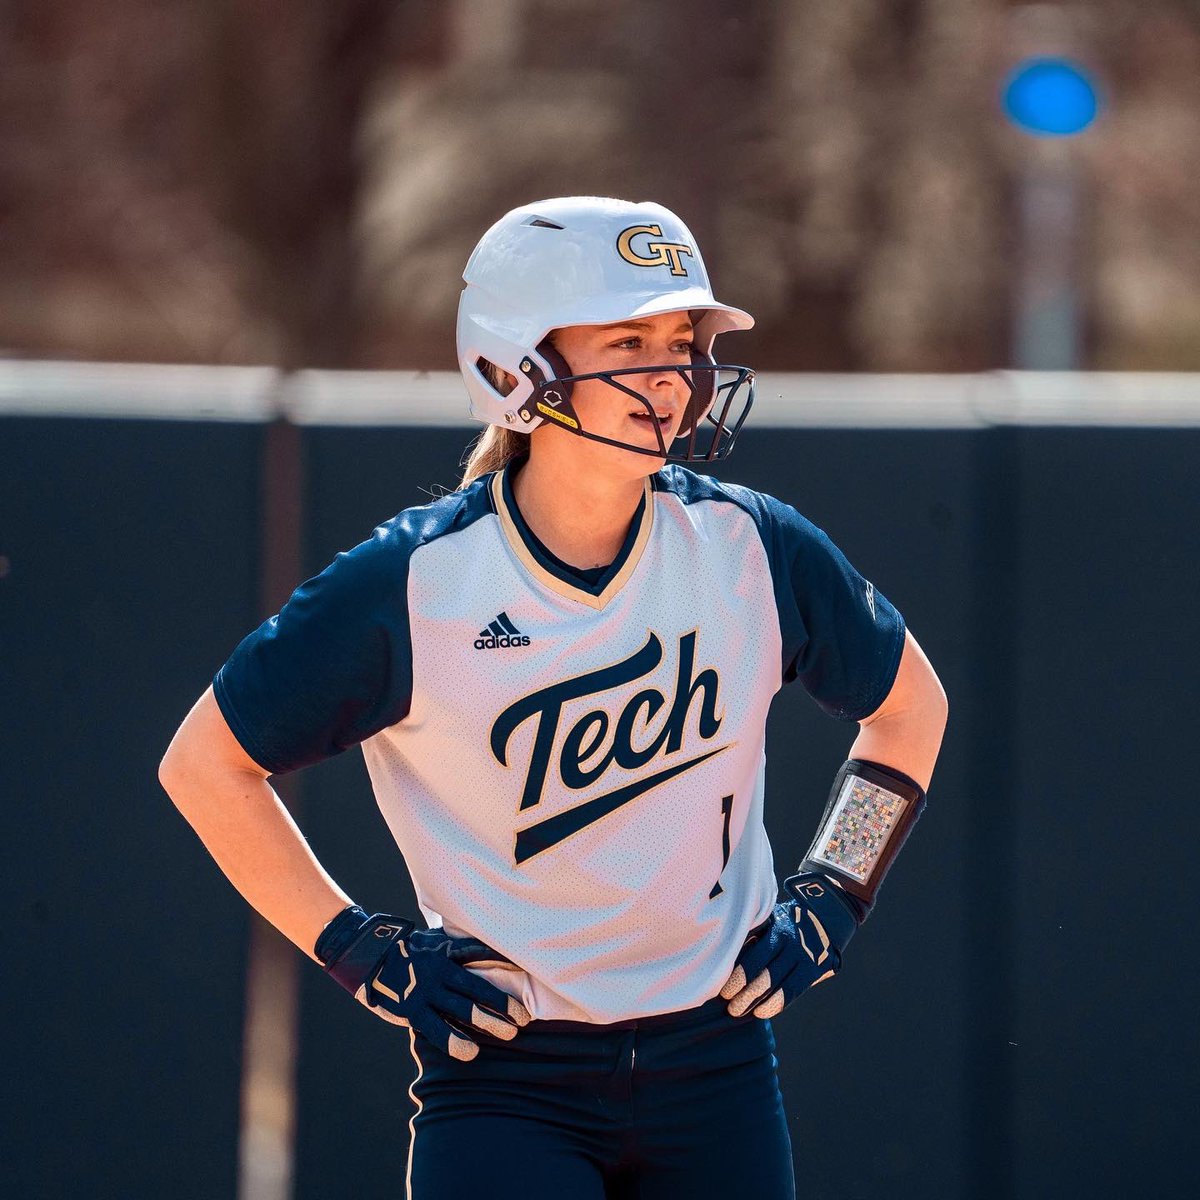 Some Saturday it was for @GaTechSoftball 🐝 ✅ Most runs (17) scored since 2019 ✅ Largest margin of victory (12) over Louisville in program history ✅ @blakeneleman surpassed 300 career strikeouts ✅ @ella_edgmon hit her first career home run #TogetherWeSwarm